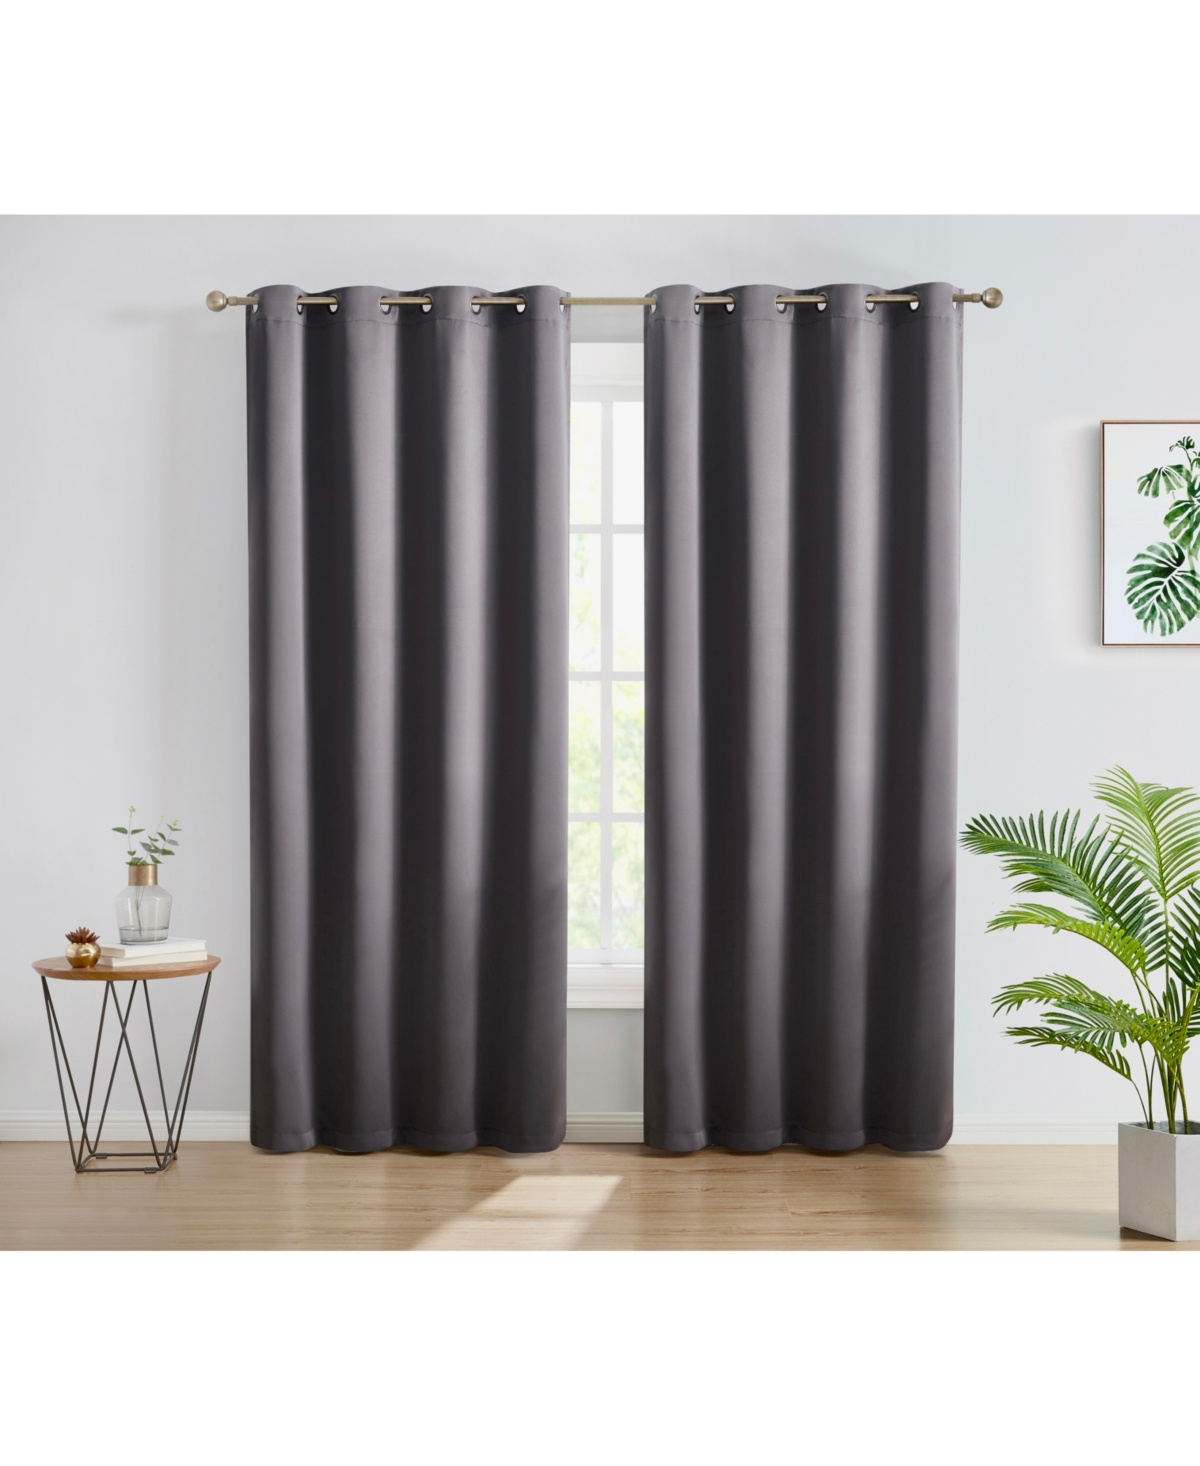 Oxford Blackout Curtains for Bedroom, Noise Reduction Thermal Insulated Window Curtain Grommet Panels, Set of 2 - Charcoal grey